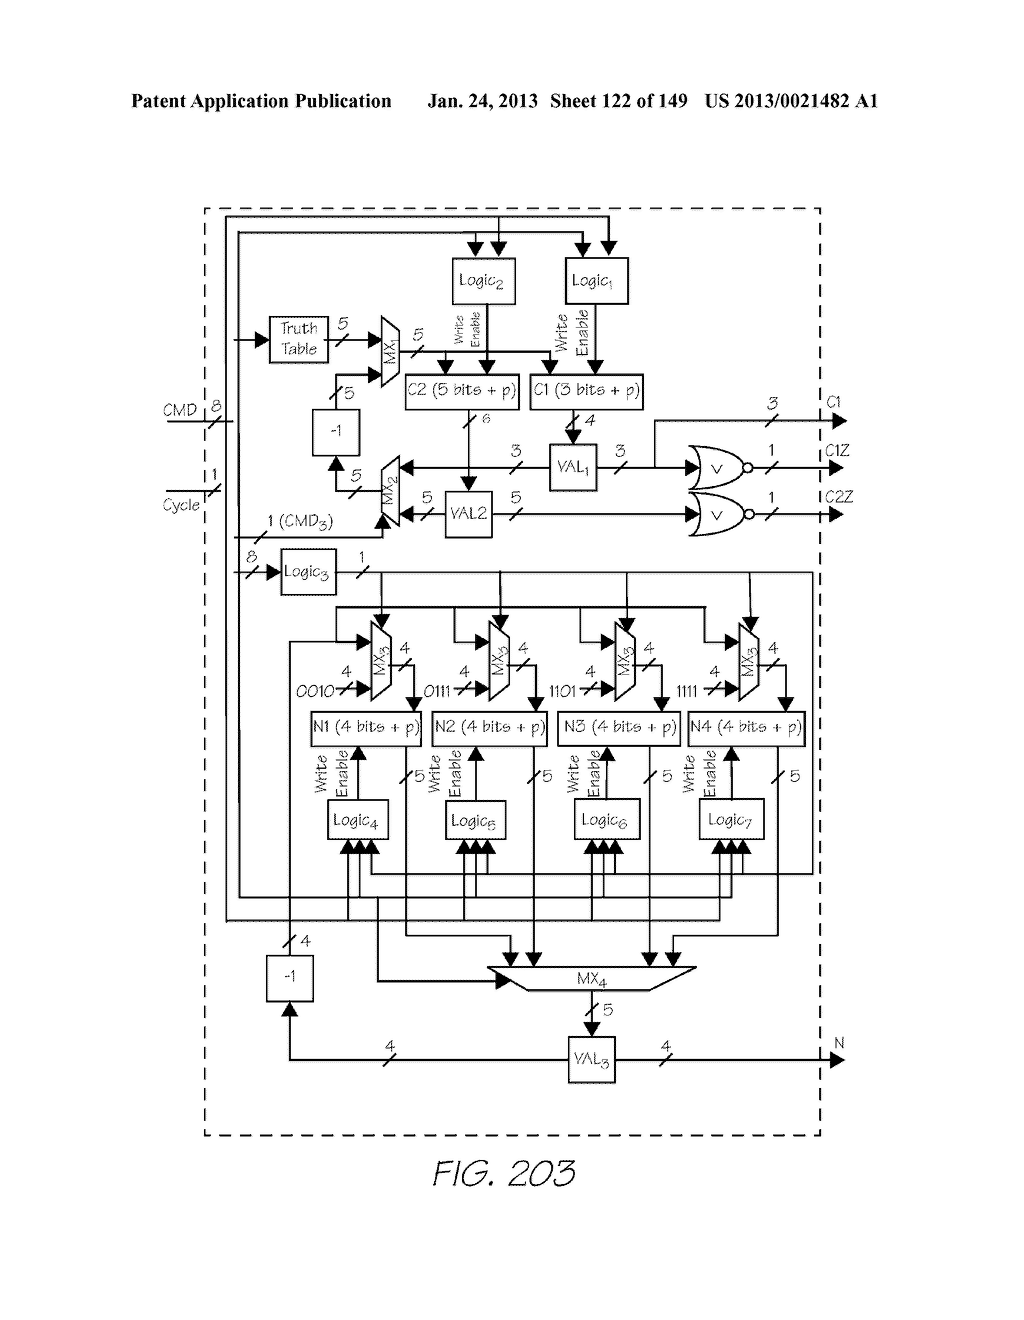 HANDHELD IMAGING DEVICE WITH SYSTEM-ON-CHIP MICROCONTROLLER INCORPORATING     ON SHARED WAFER IMAGE PROCESSOR AND IMAGE SENSOR - diagram, schematic, and image 123